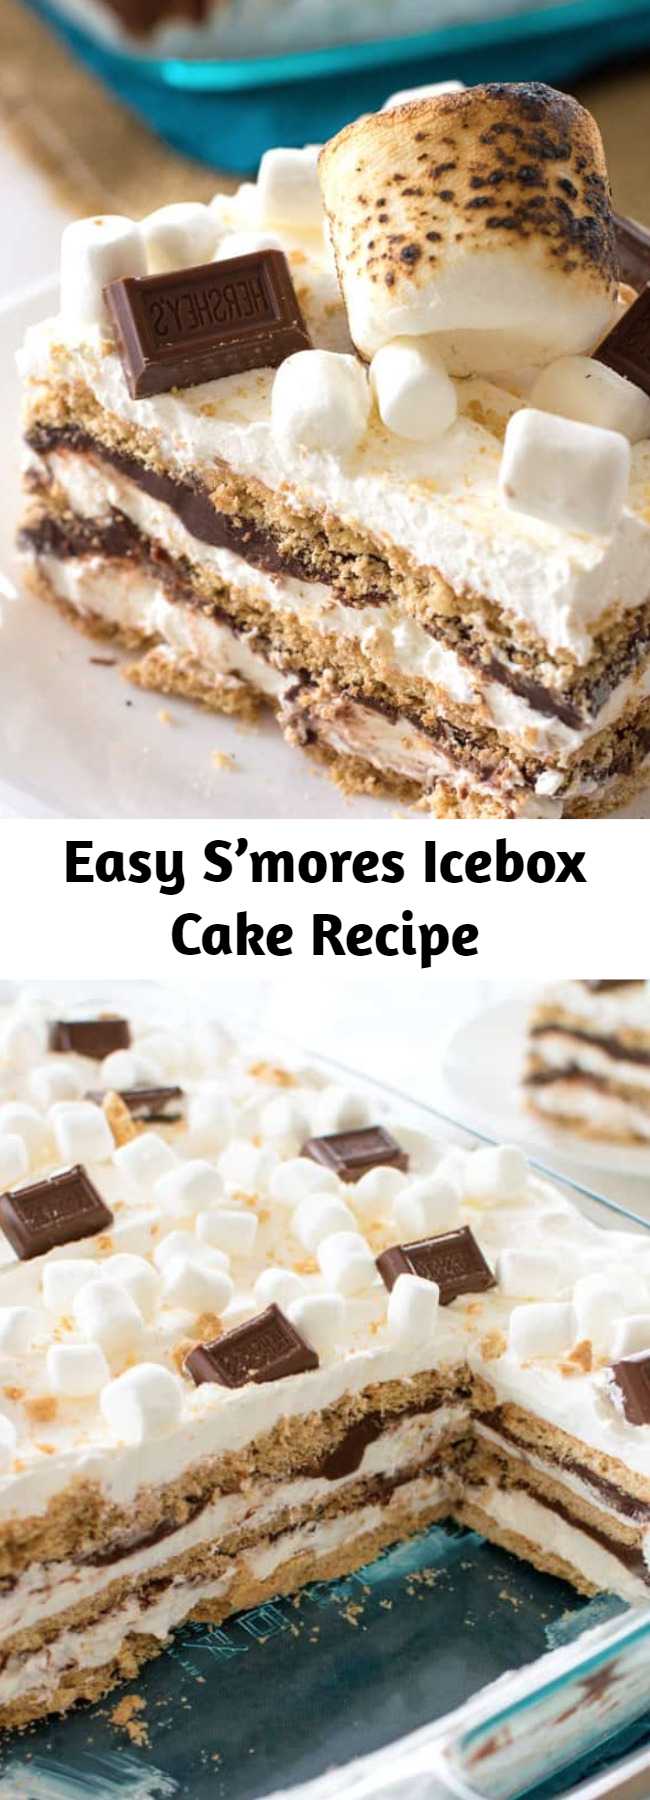 Easy S’mores Icebox Cake Recipe - Bring the s’mores indoors with this S’mores Icebox Cake to feed a crowd. With layers of graham crackers, marshmallow whipped cream, and chocolate ganache I guarantee everyone will be clamoring for s’more! #smores #hersheys #iceboxcake #cake #summer